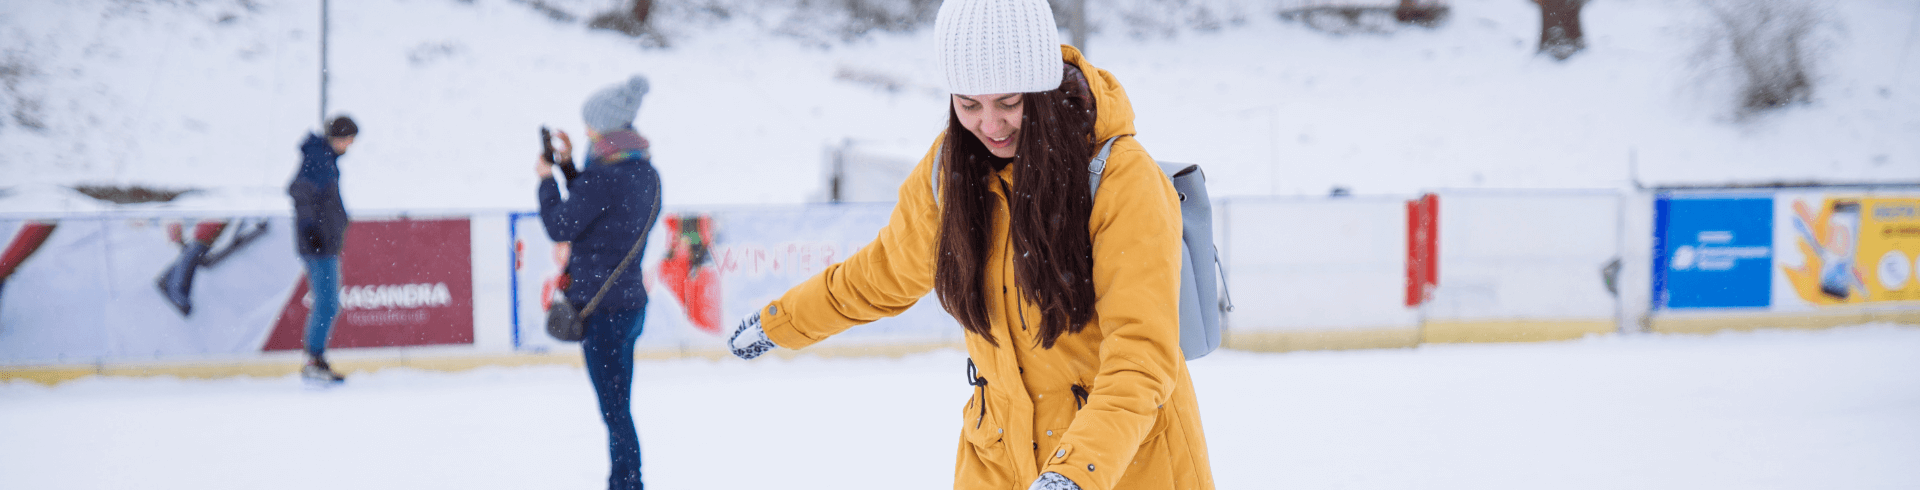 Synthetic Ice Rinks in Ski Resorts | Increase your revenue